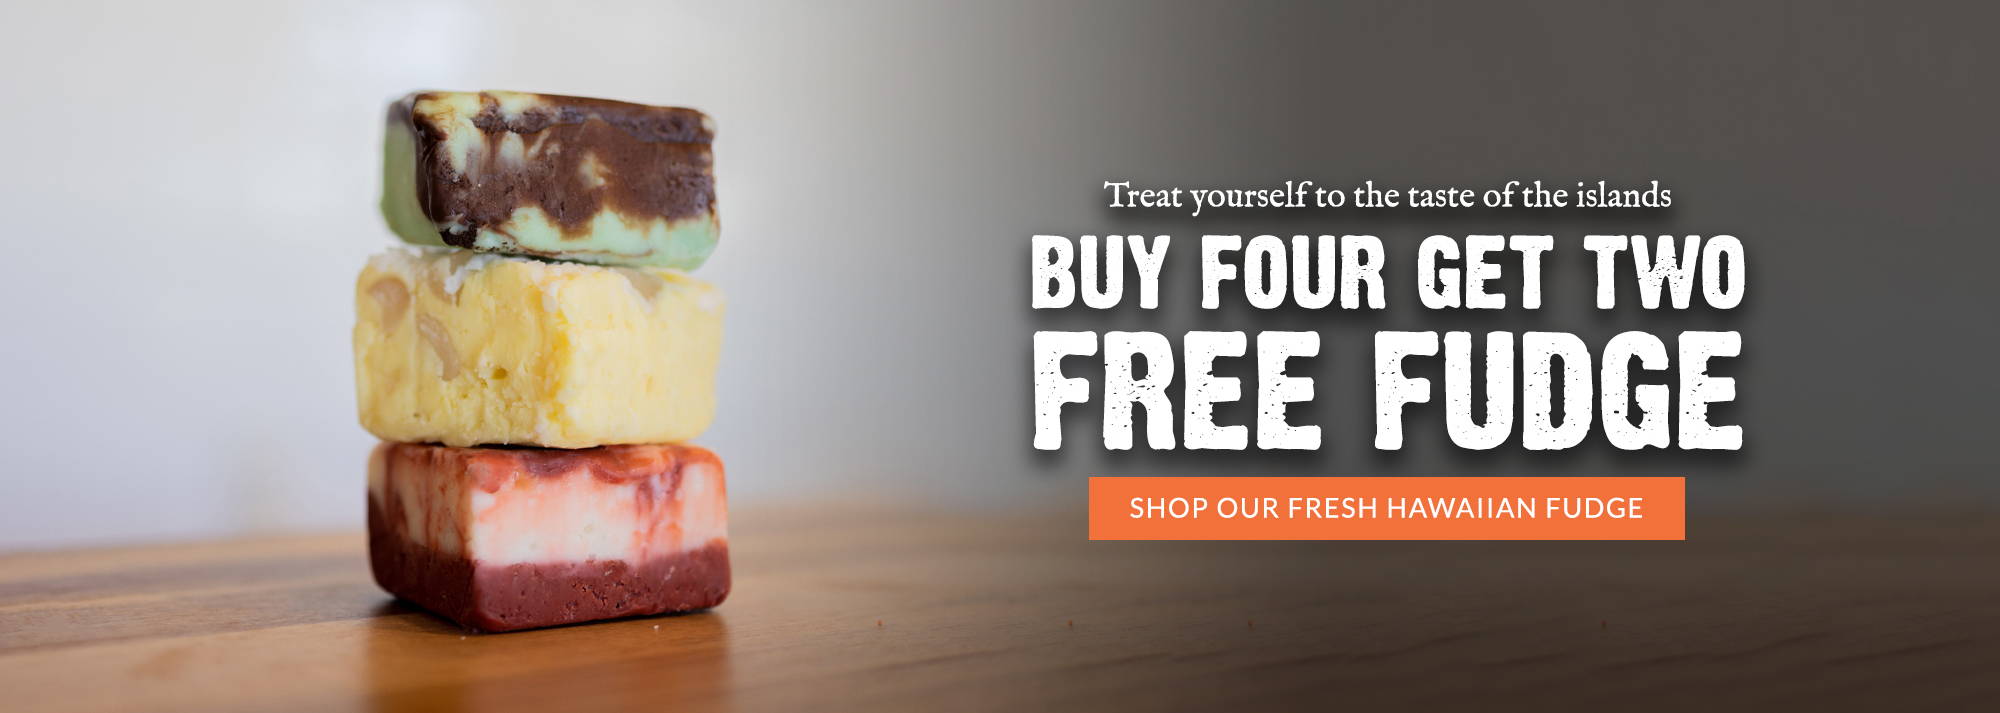 Satisfy your sweet tooth with the taste of fresh Hawaiian fudge! Buy 4 fudge and get 2 more for free. Enjoy the rich and creamy goodness of the islands with every bite. Order now and treat yourself to a piece of paradise!